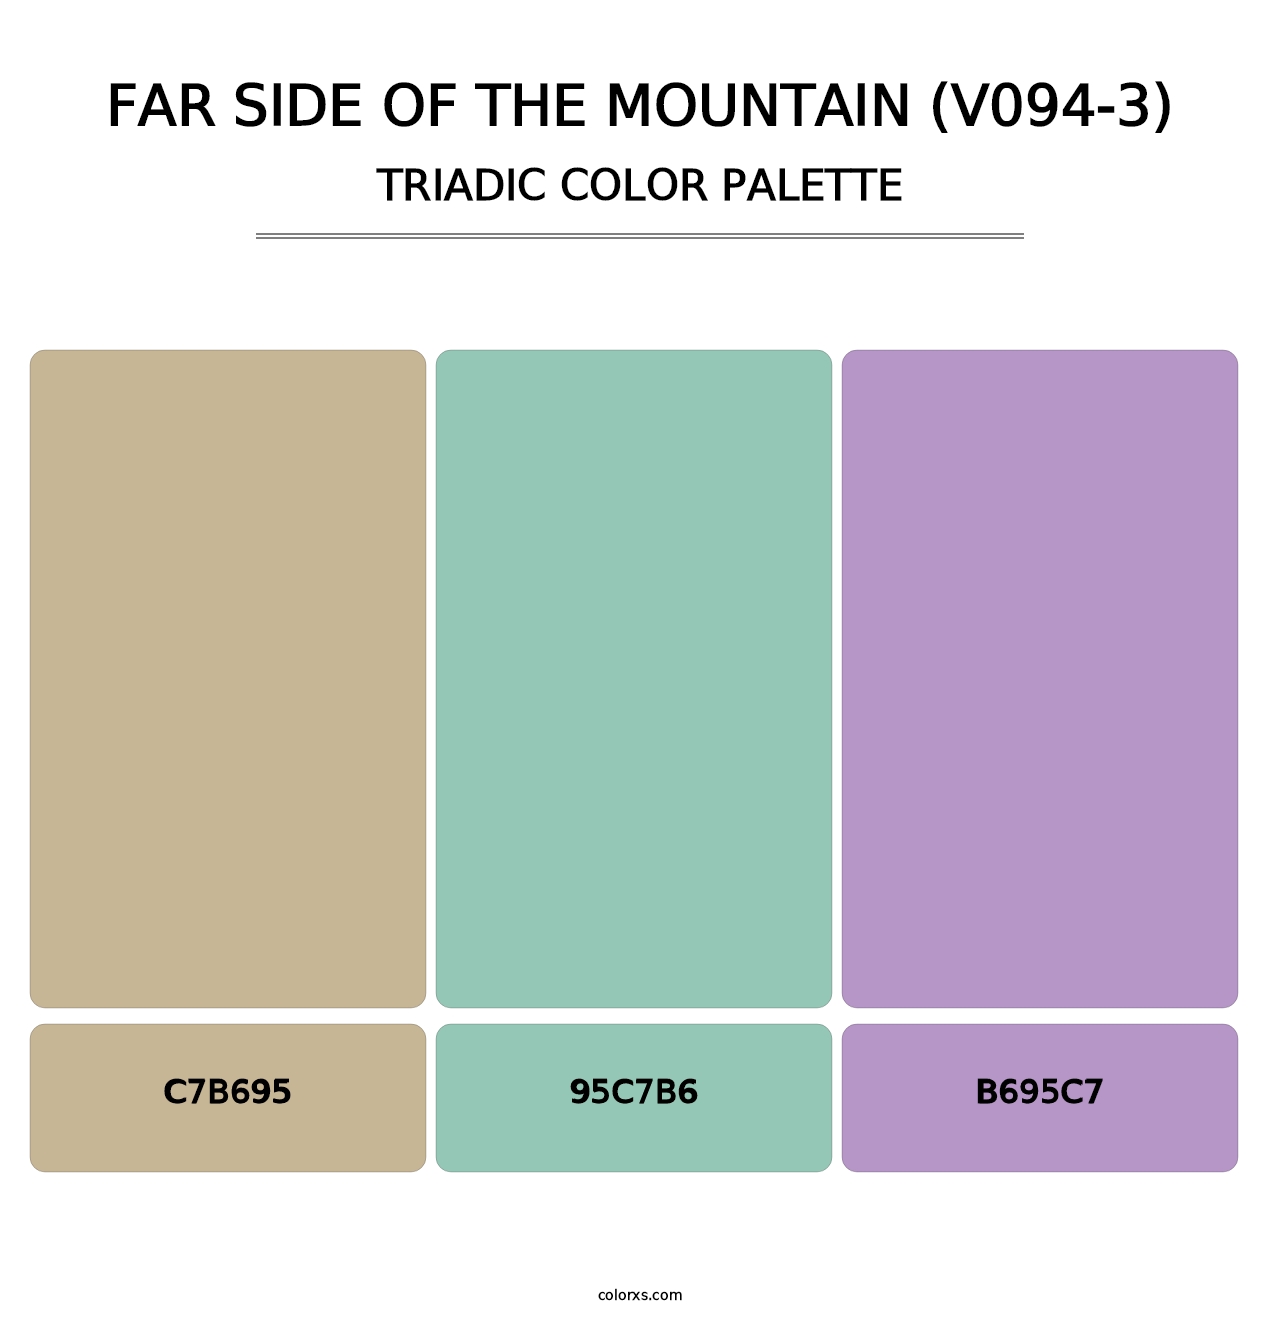 Far Side of the Mountain (V094-3) - Triadic Color Palette